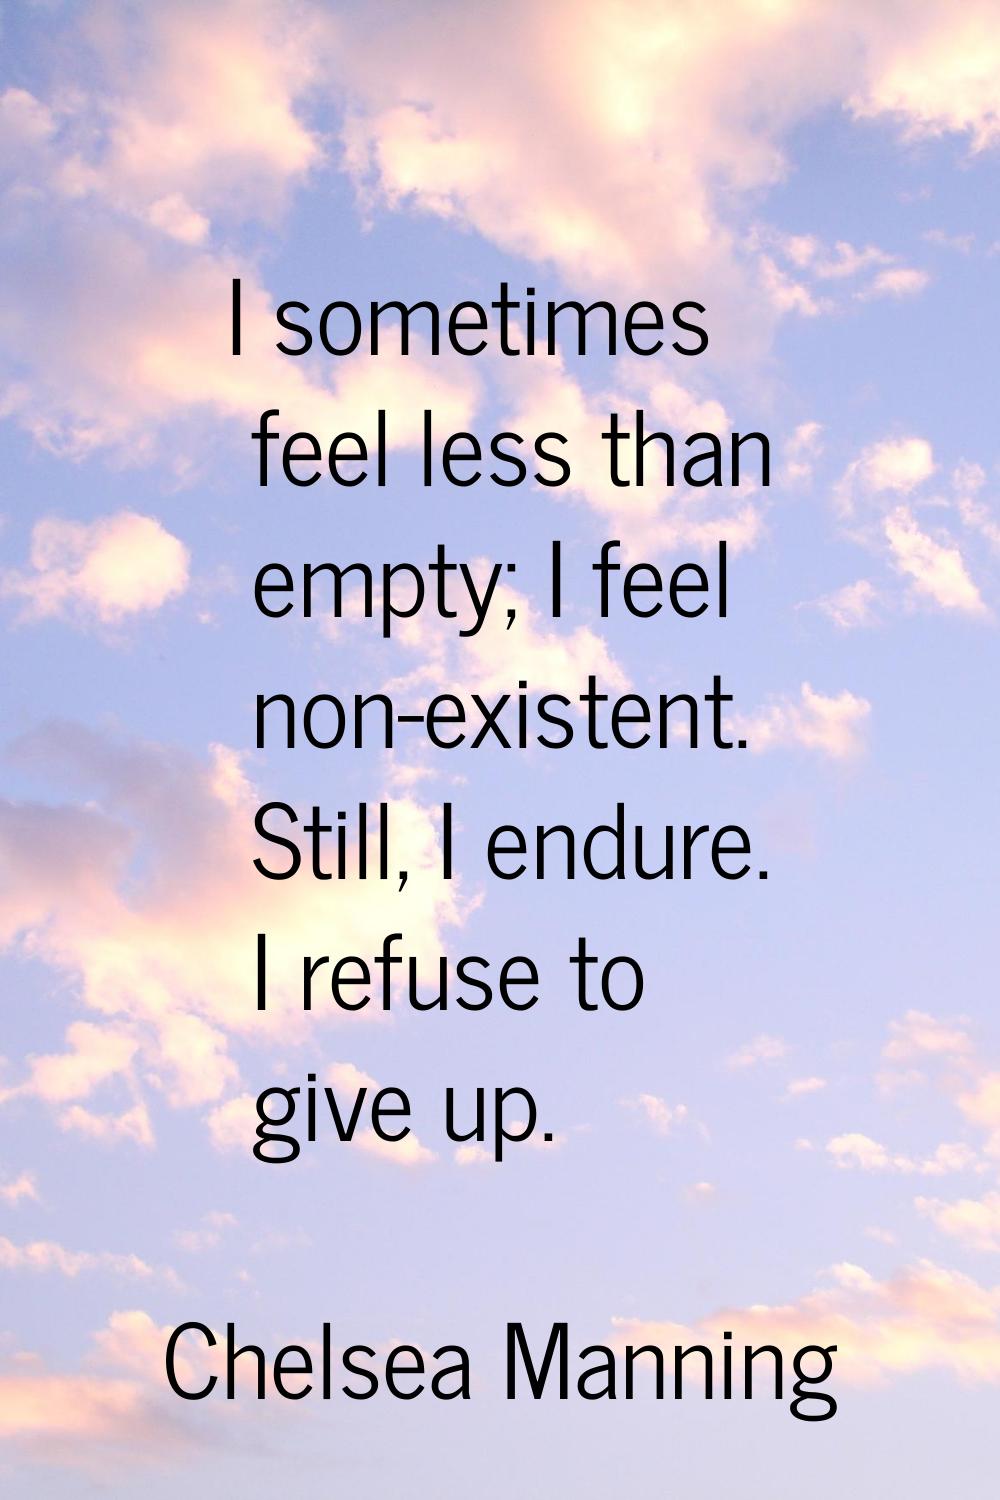 I sometimes feel less than empty; I feel non-existent. Still, I endure. I refuse to give up.